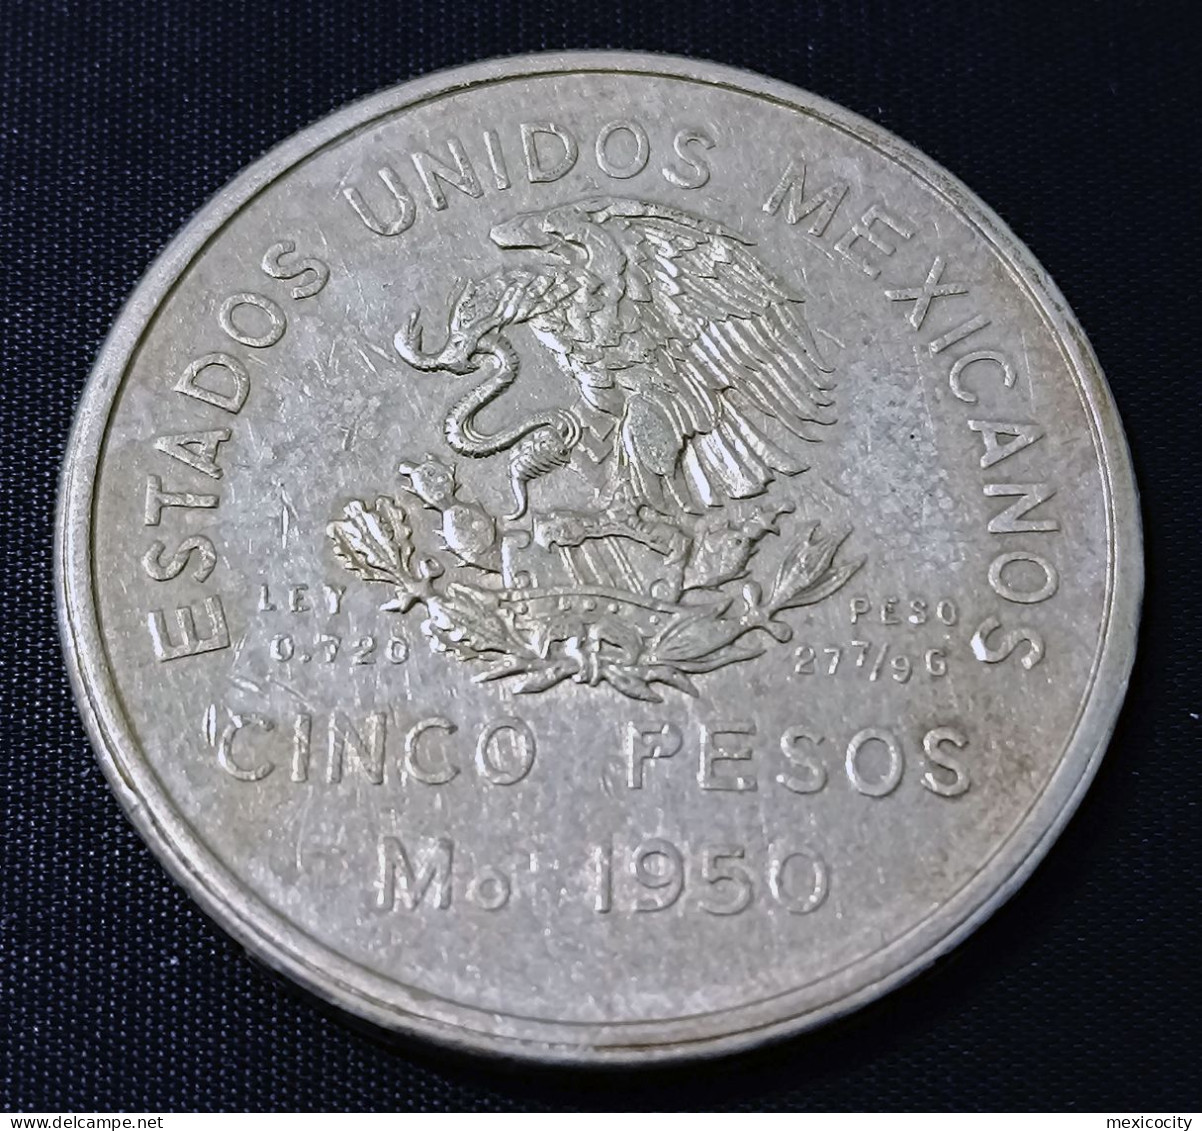 MEXICO 1950 $5 SOUTHEASTERN RAILROAD Silver Coin, See Imgs., Nice, Rather Scarce - Mexico